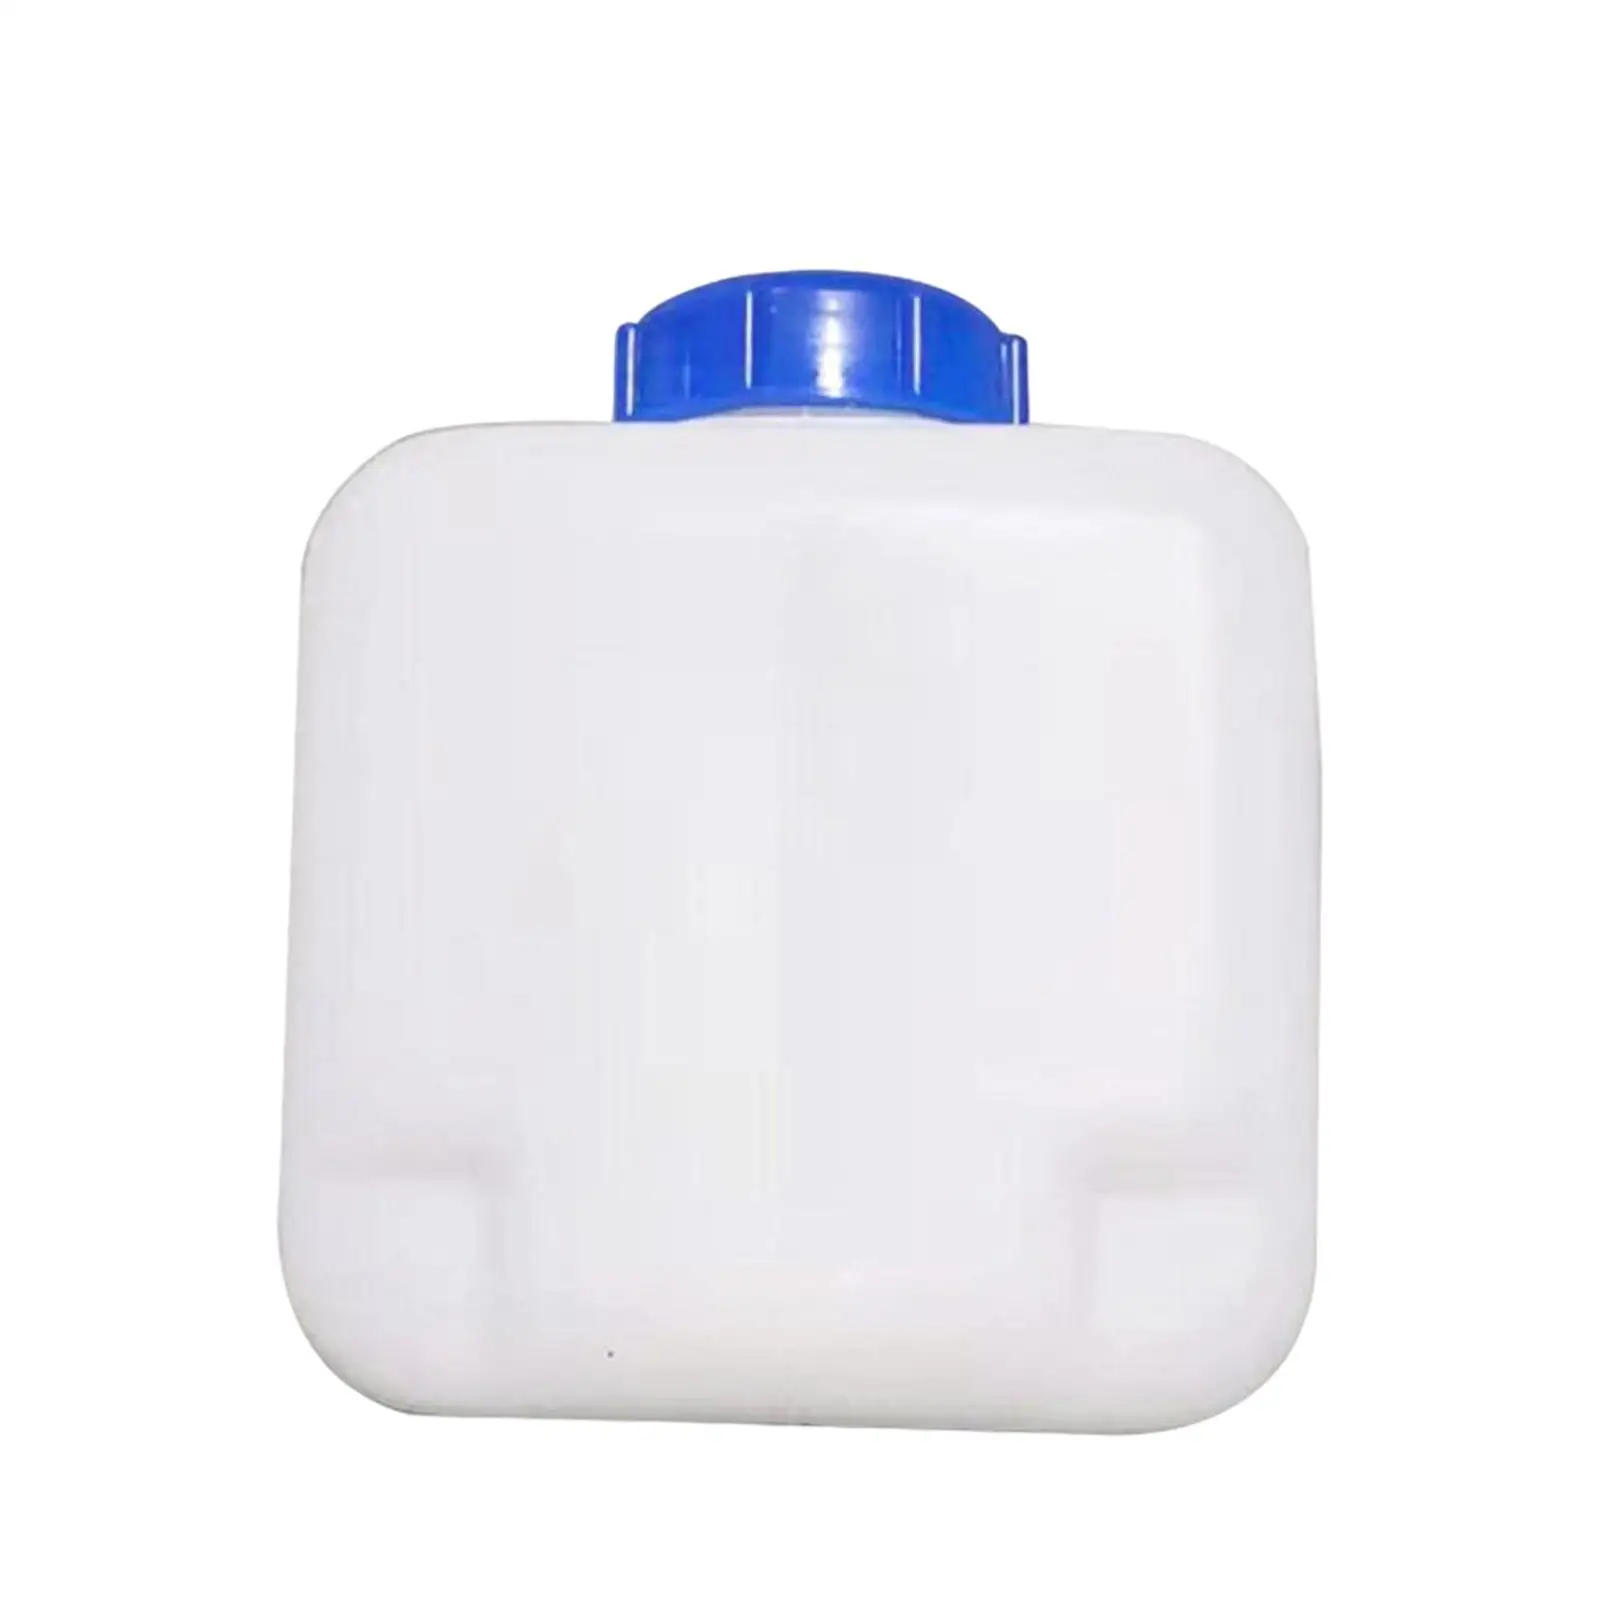 Sturdy Gasoline Fuel Tank for Air Parking Heater Accessory Replacement